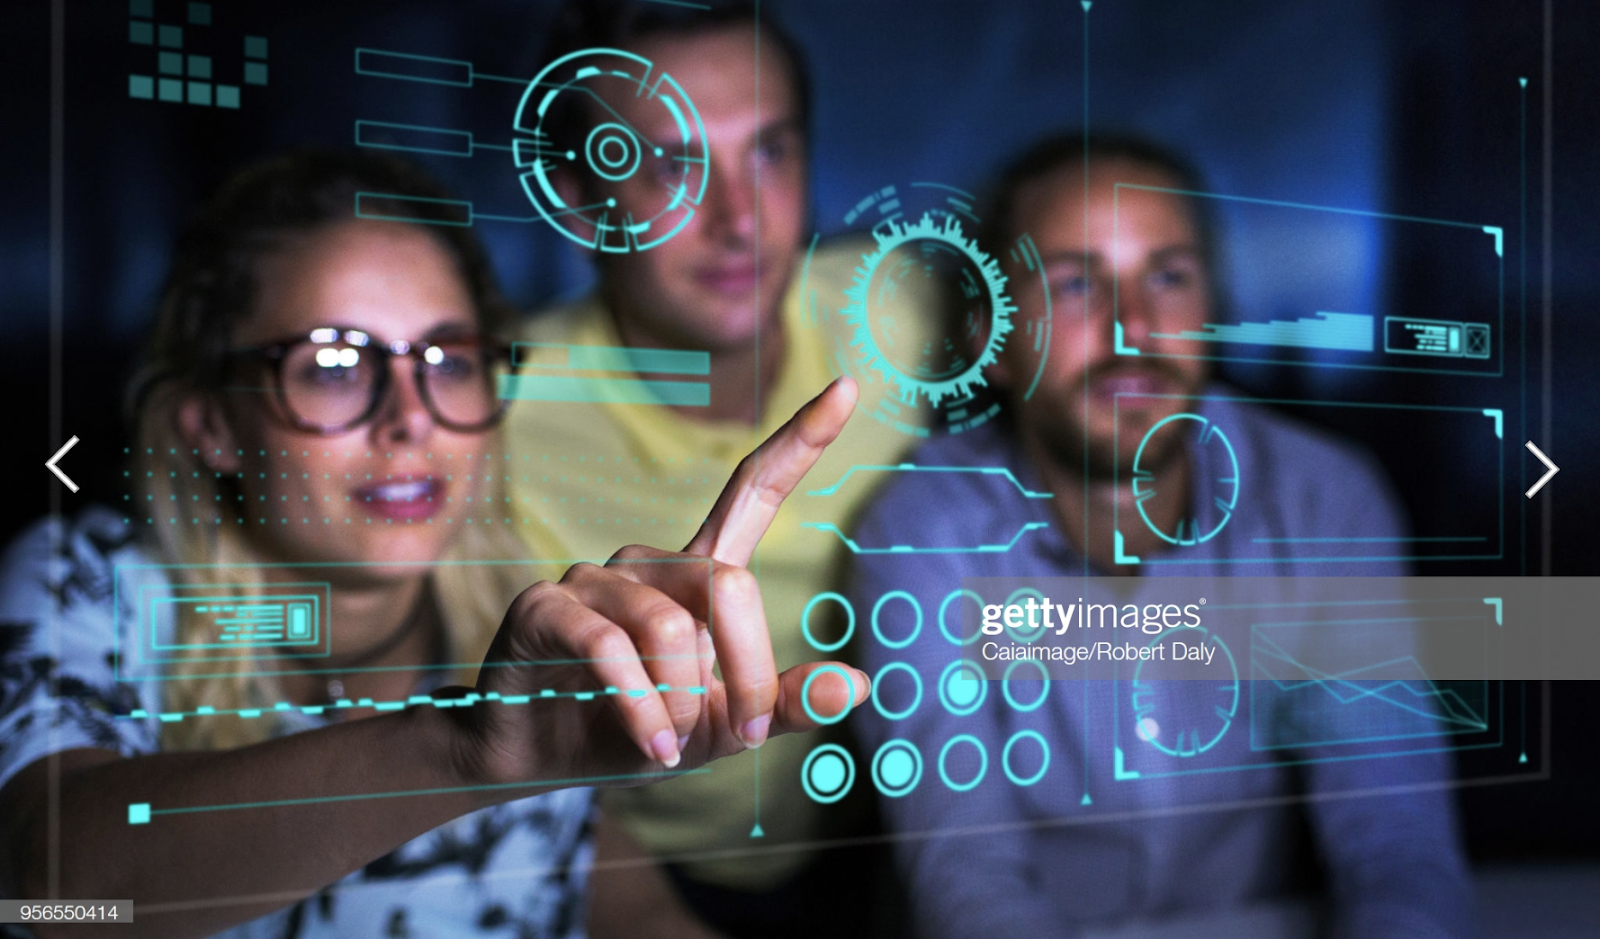 stock photo of people interacting with a digital screen